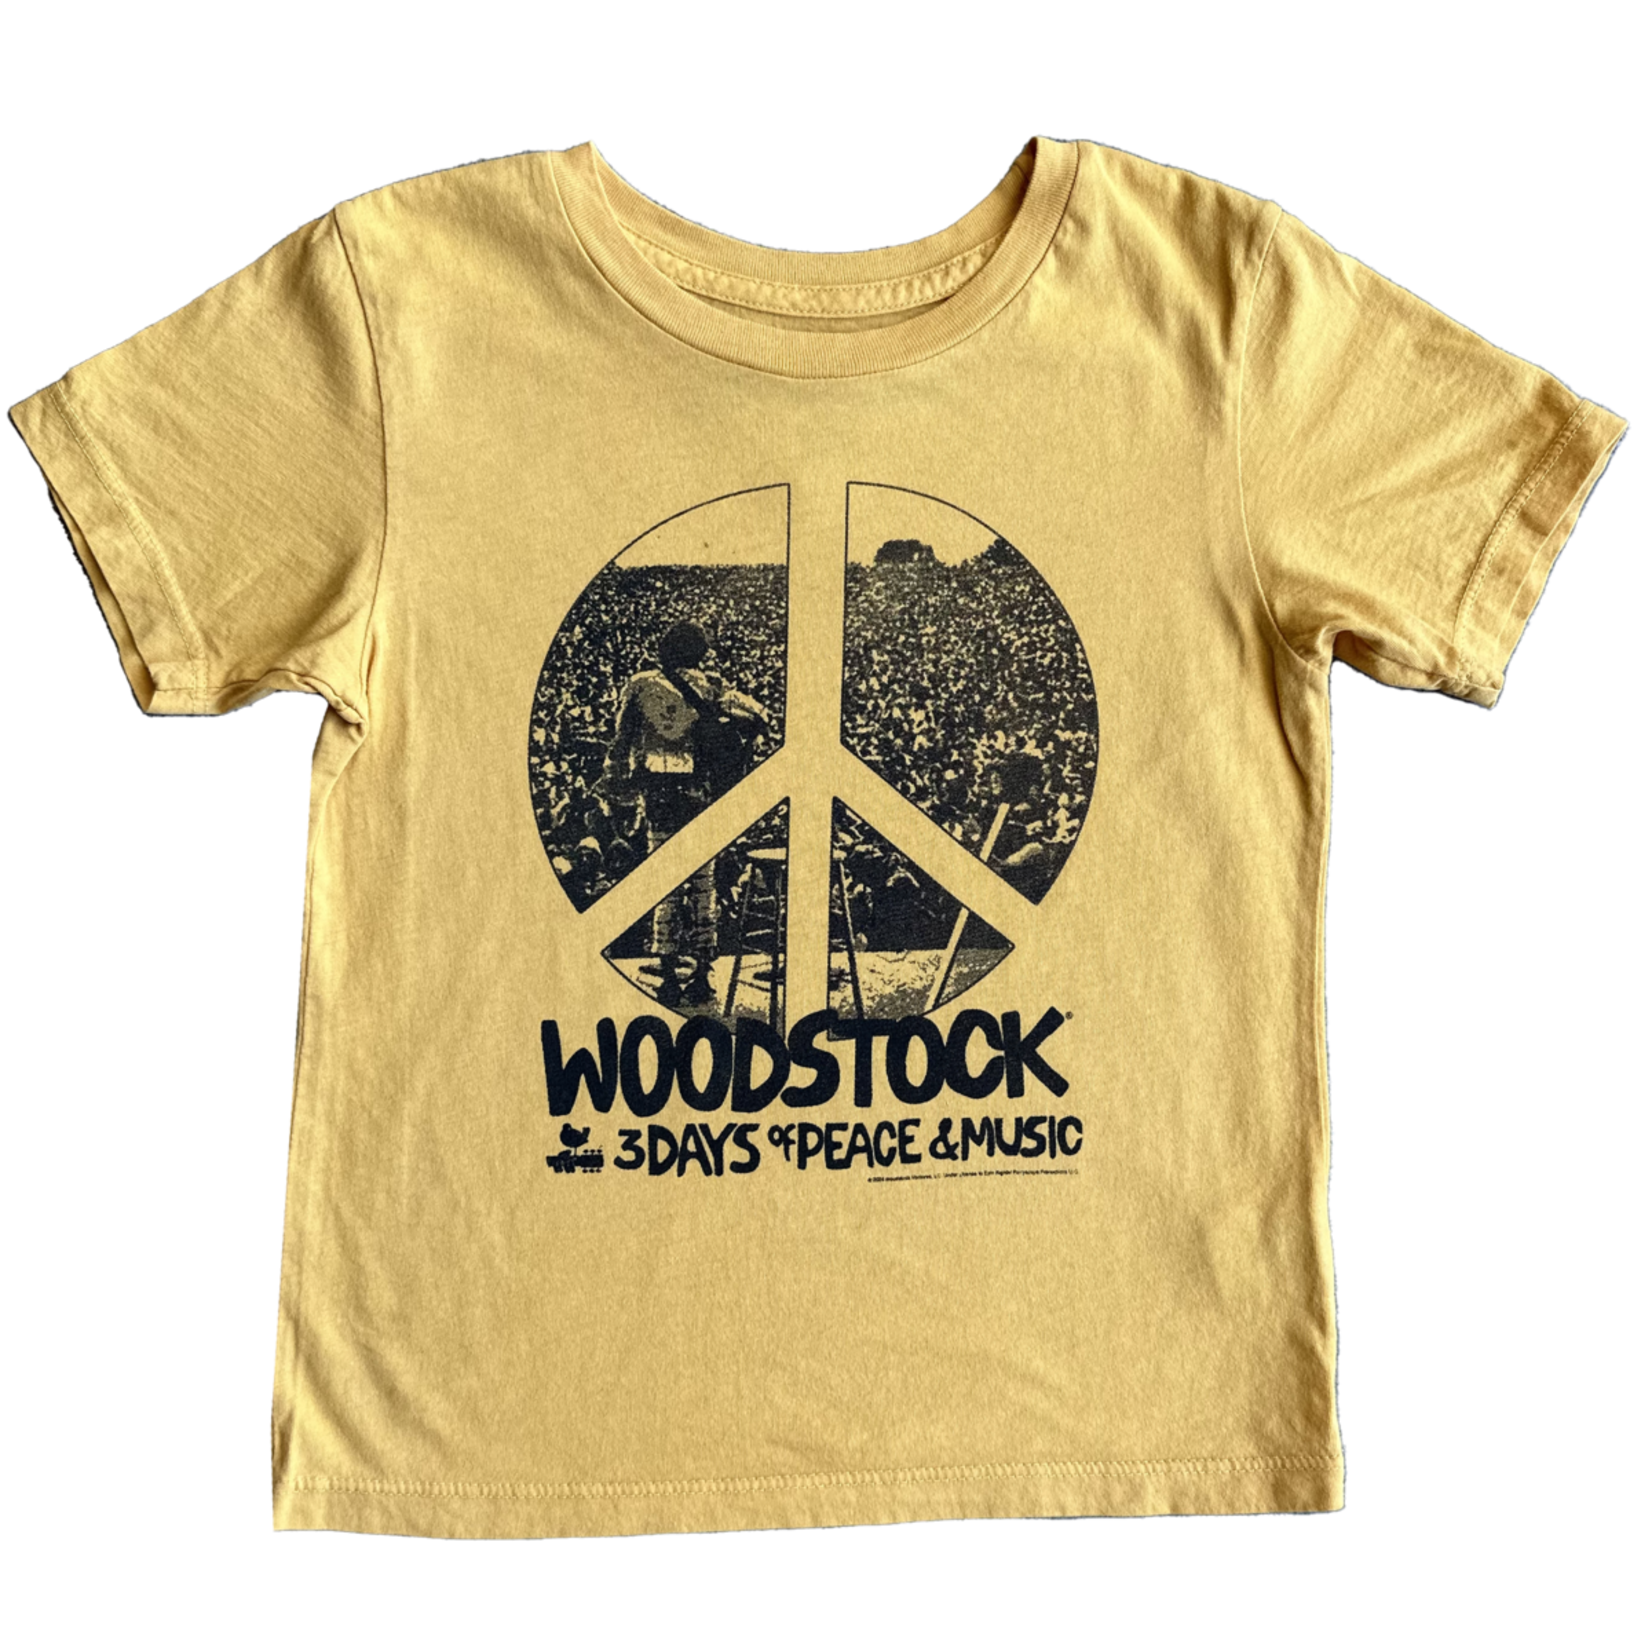 Rowdy Sprout Rowdy Sprout Sunset Woodstock S/S Tee